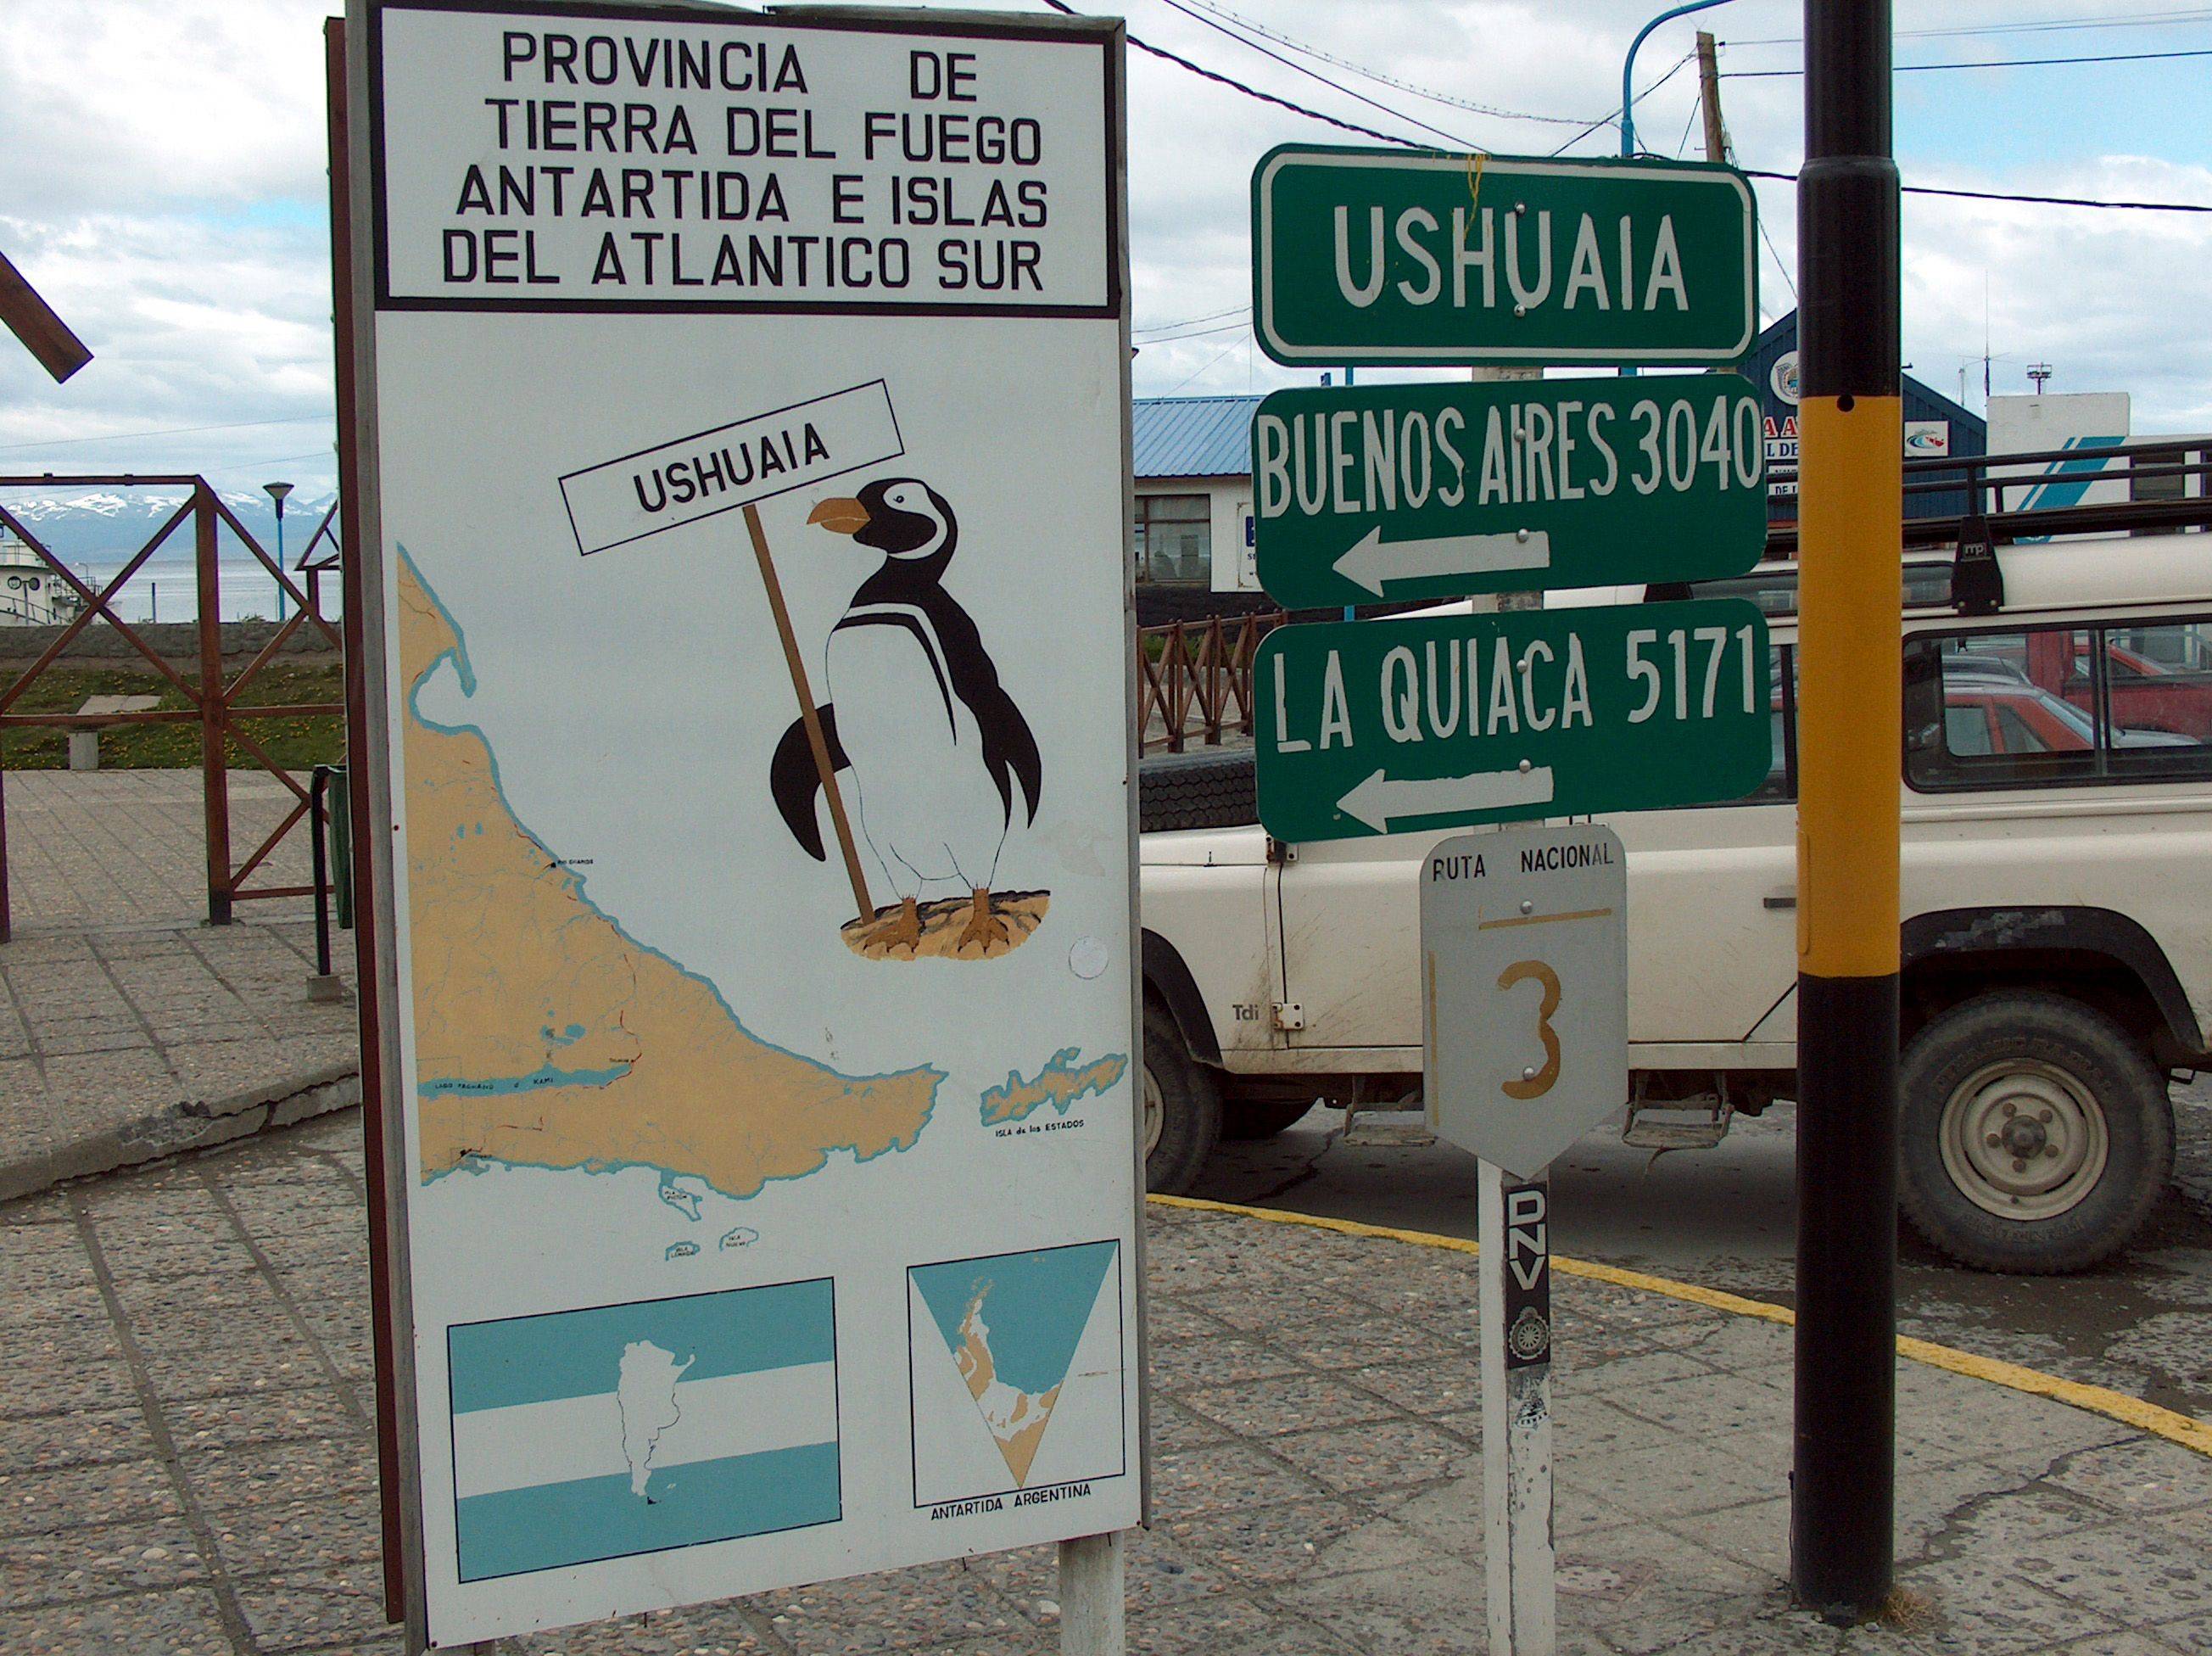 
Ankunft in Ushuaia – Buenos Aires